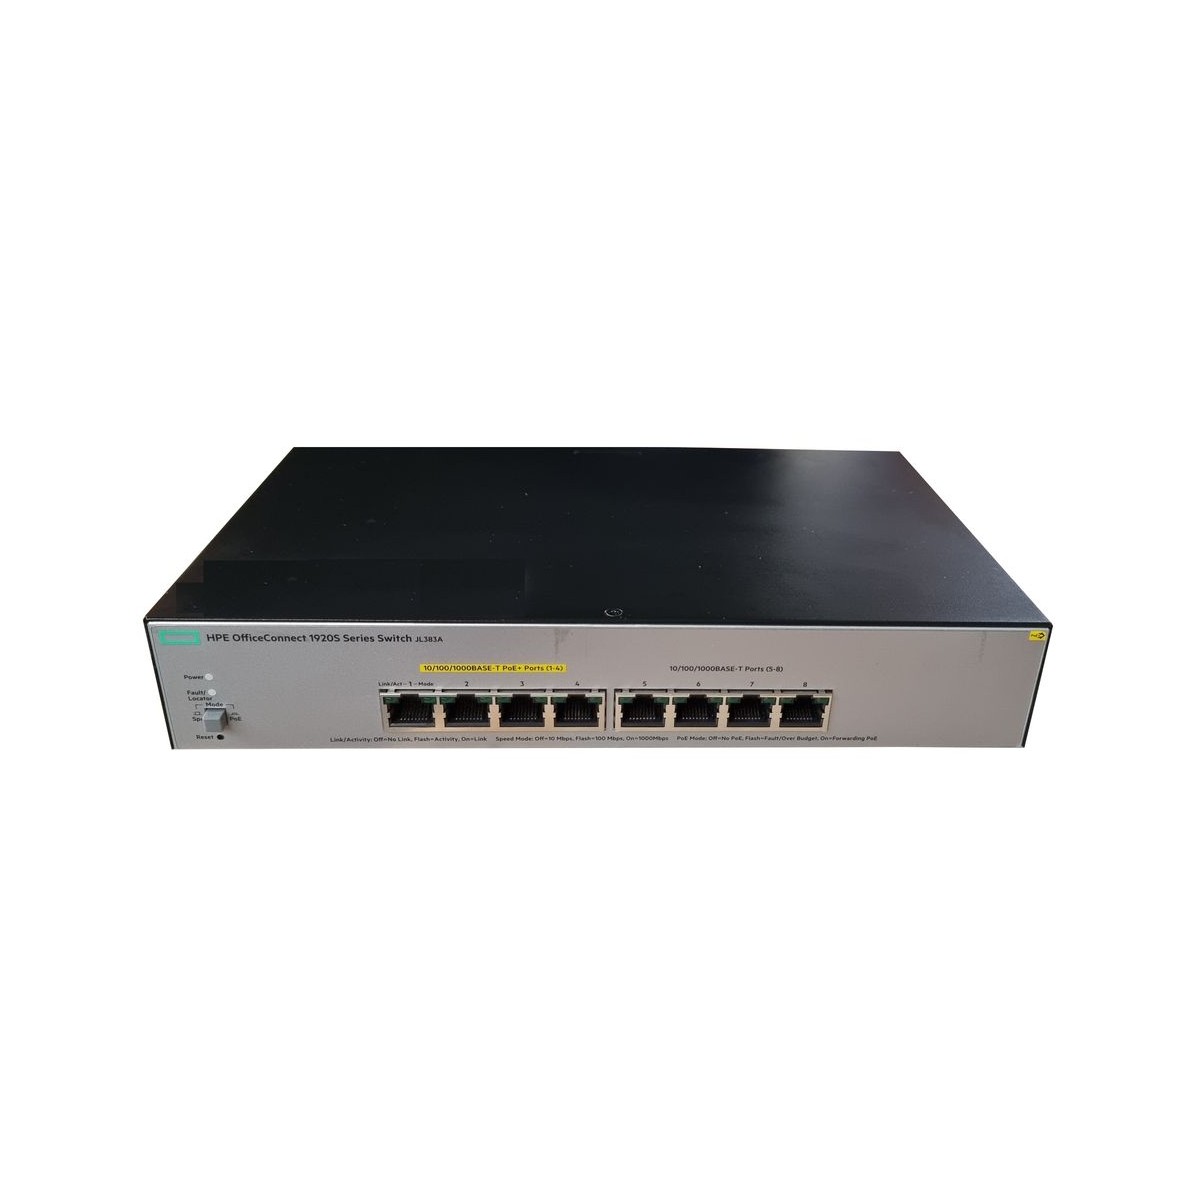 WITCH HP OFFICECONNECT 1920S 8x1GB 4xPoE JL383A